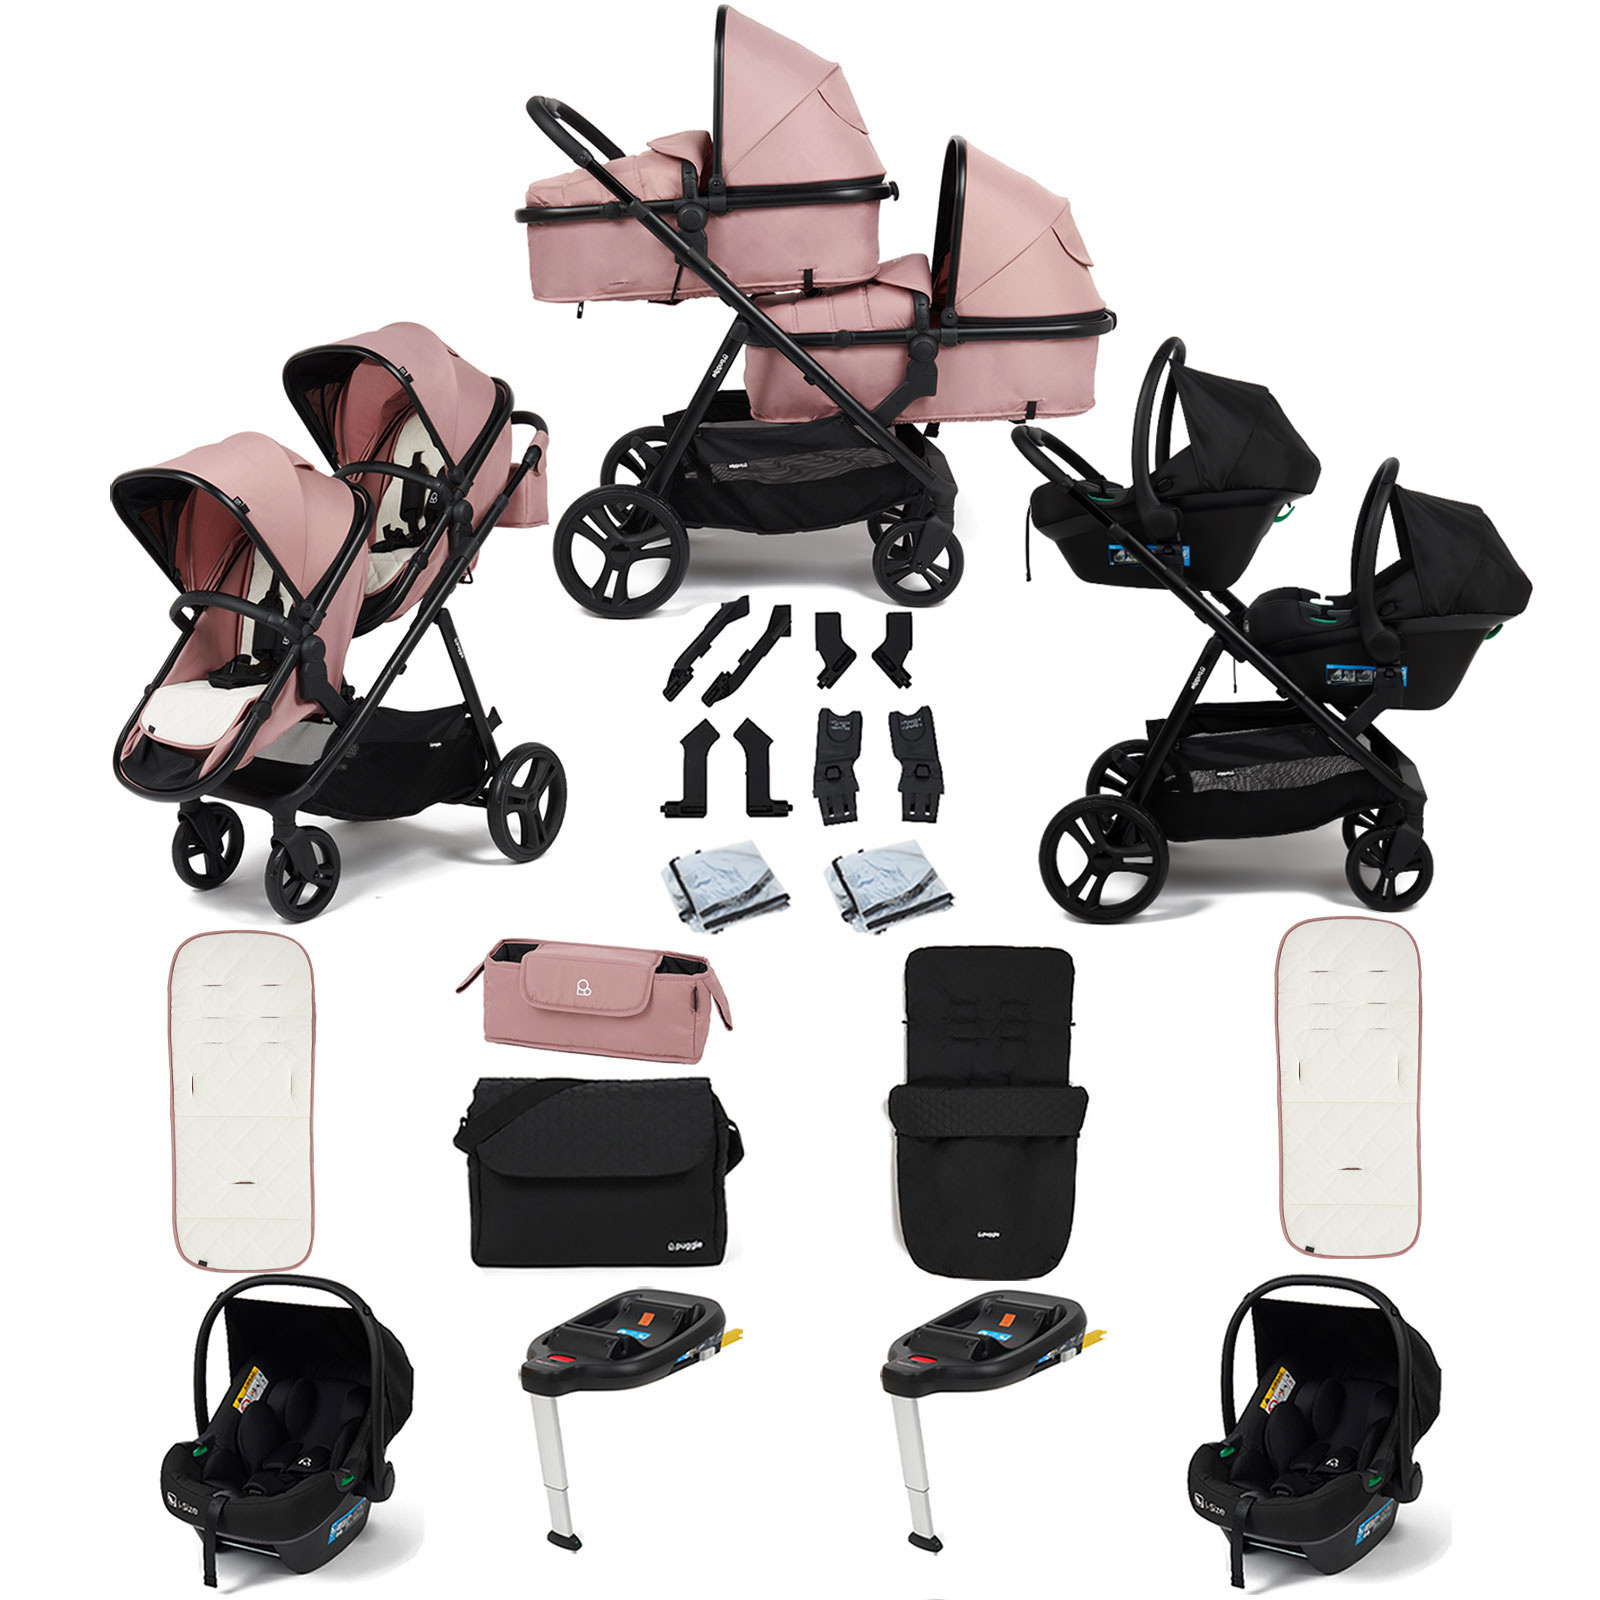 Puggle Memphis 2-in-1 Duo Double Travel System with 2 i-Size Car Seats, 2 ISOFIX Bases, Footmuff and Changing Bag - Dusk Pink